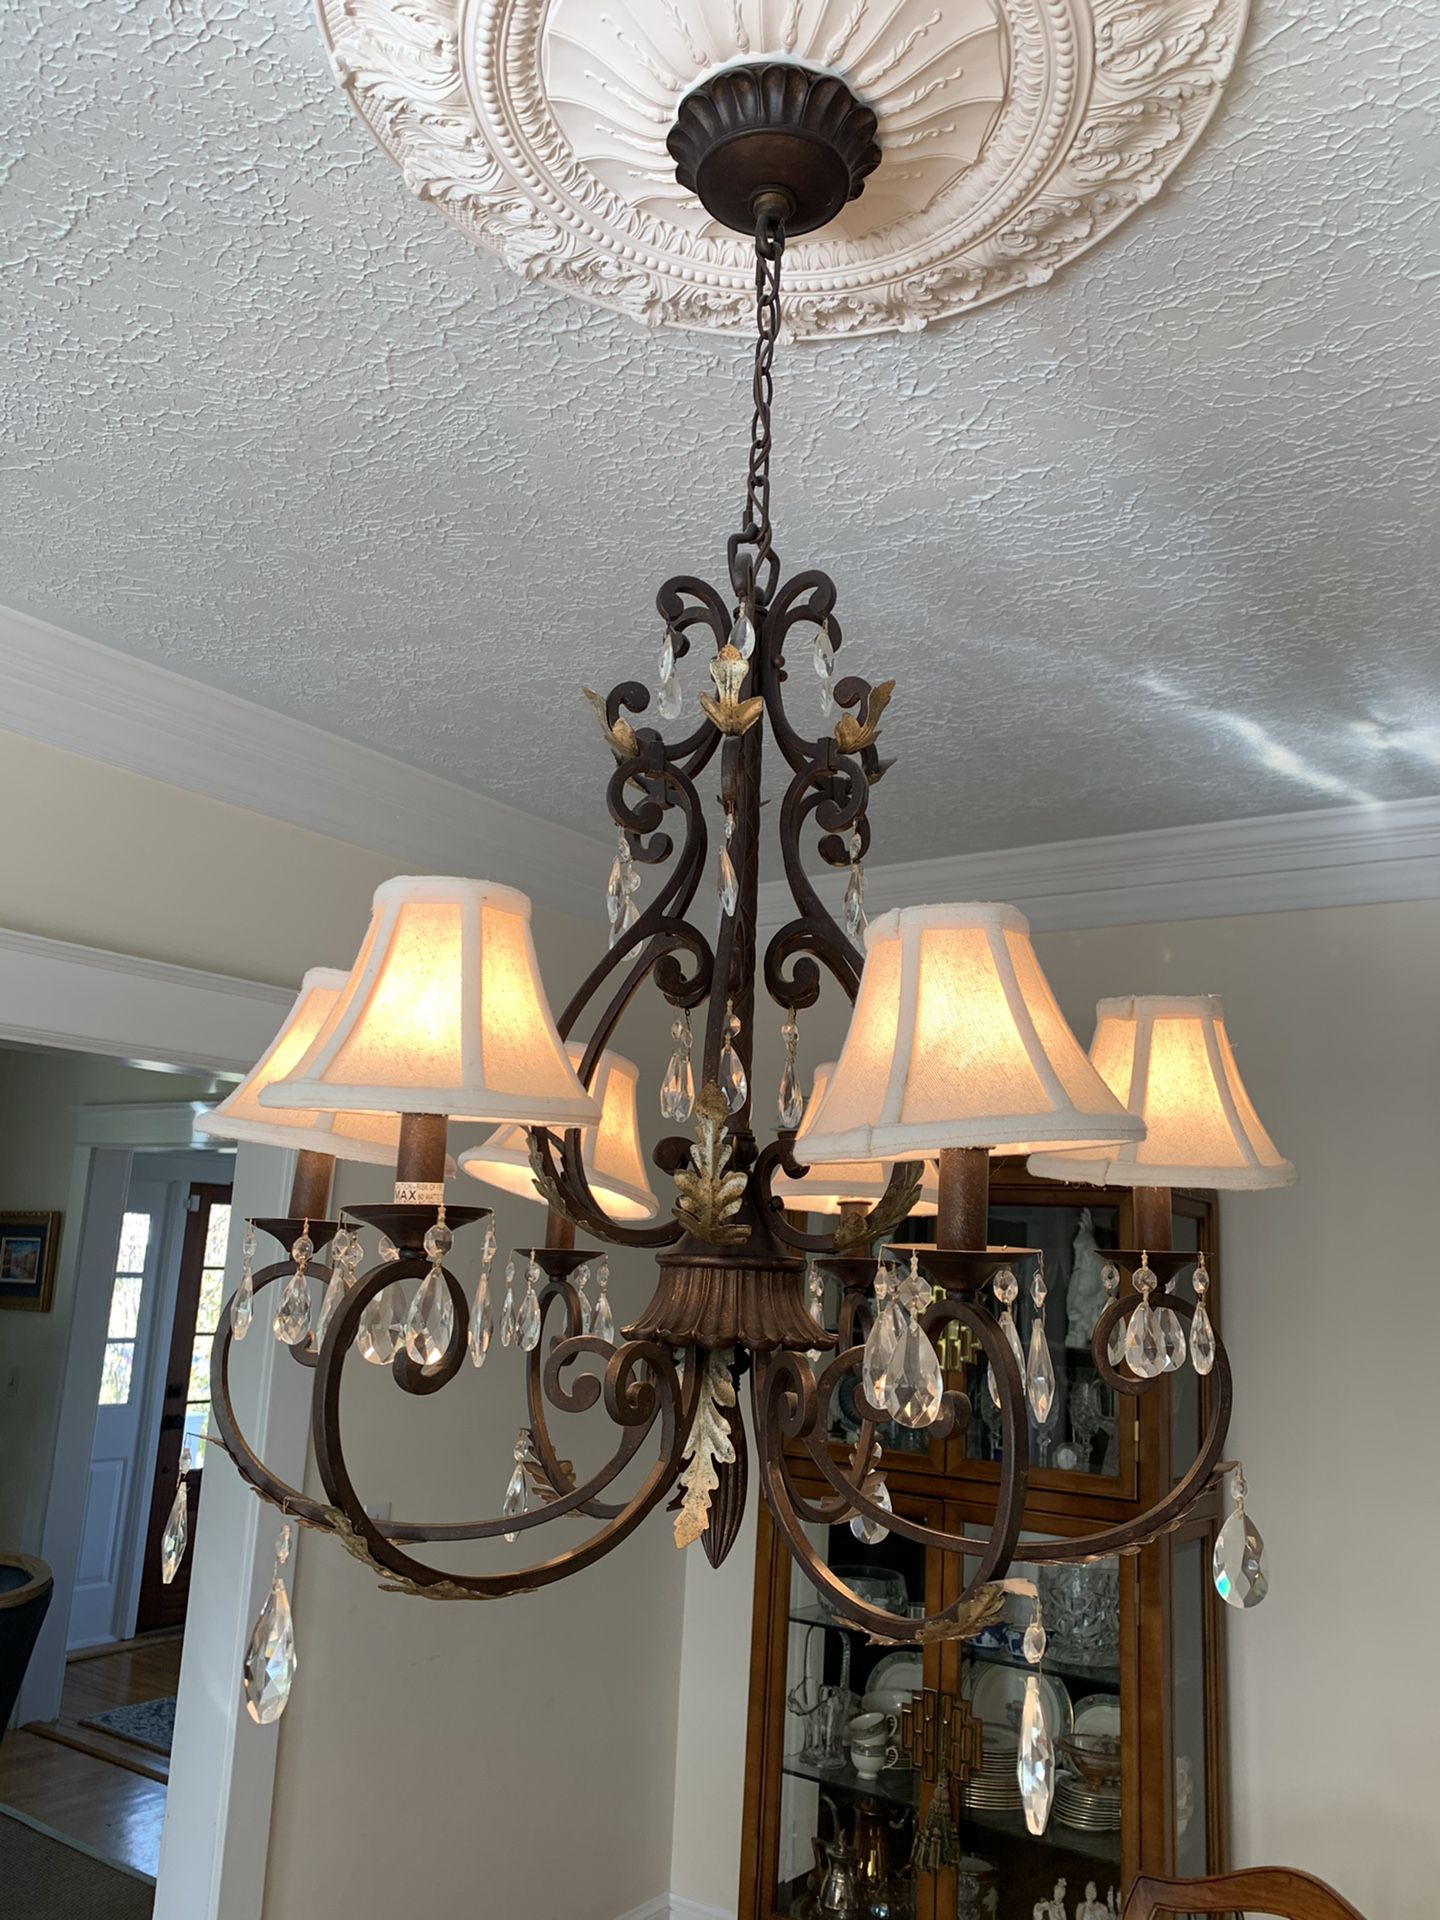 6 light iron and crystal chandelier